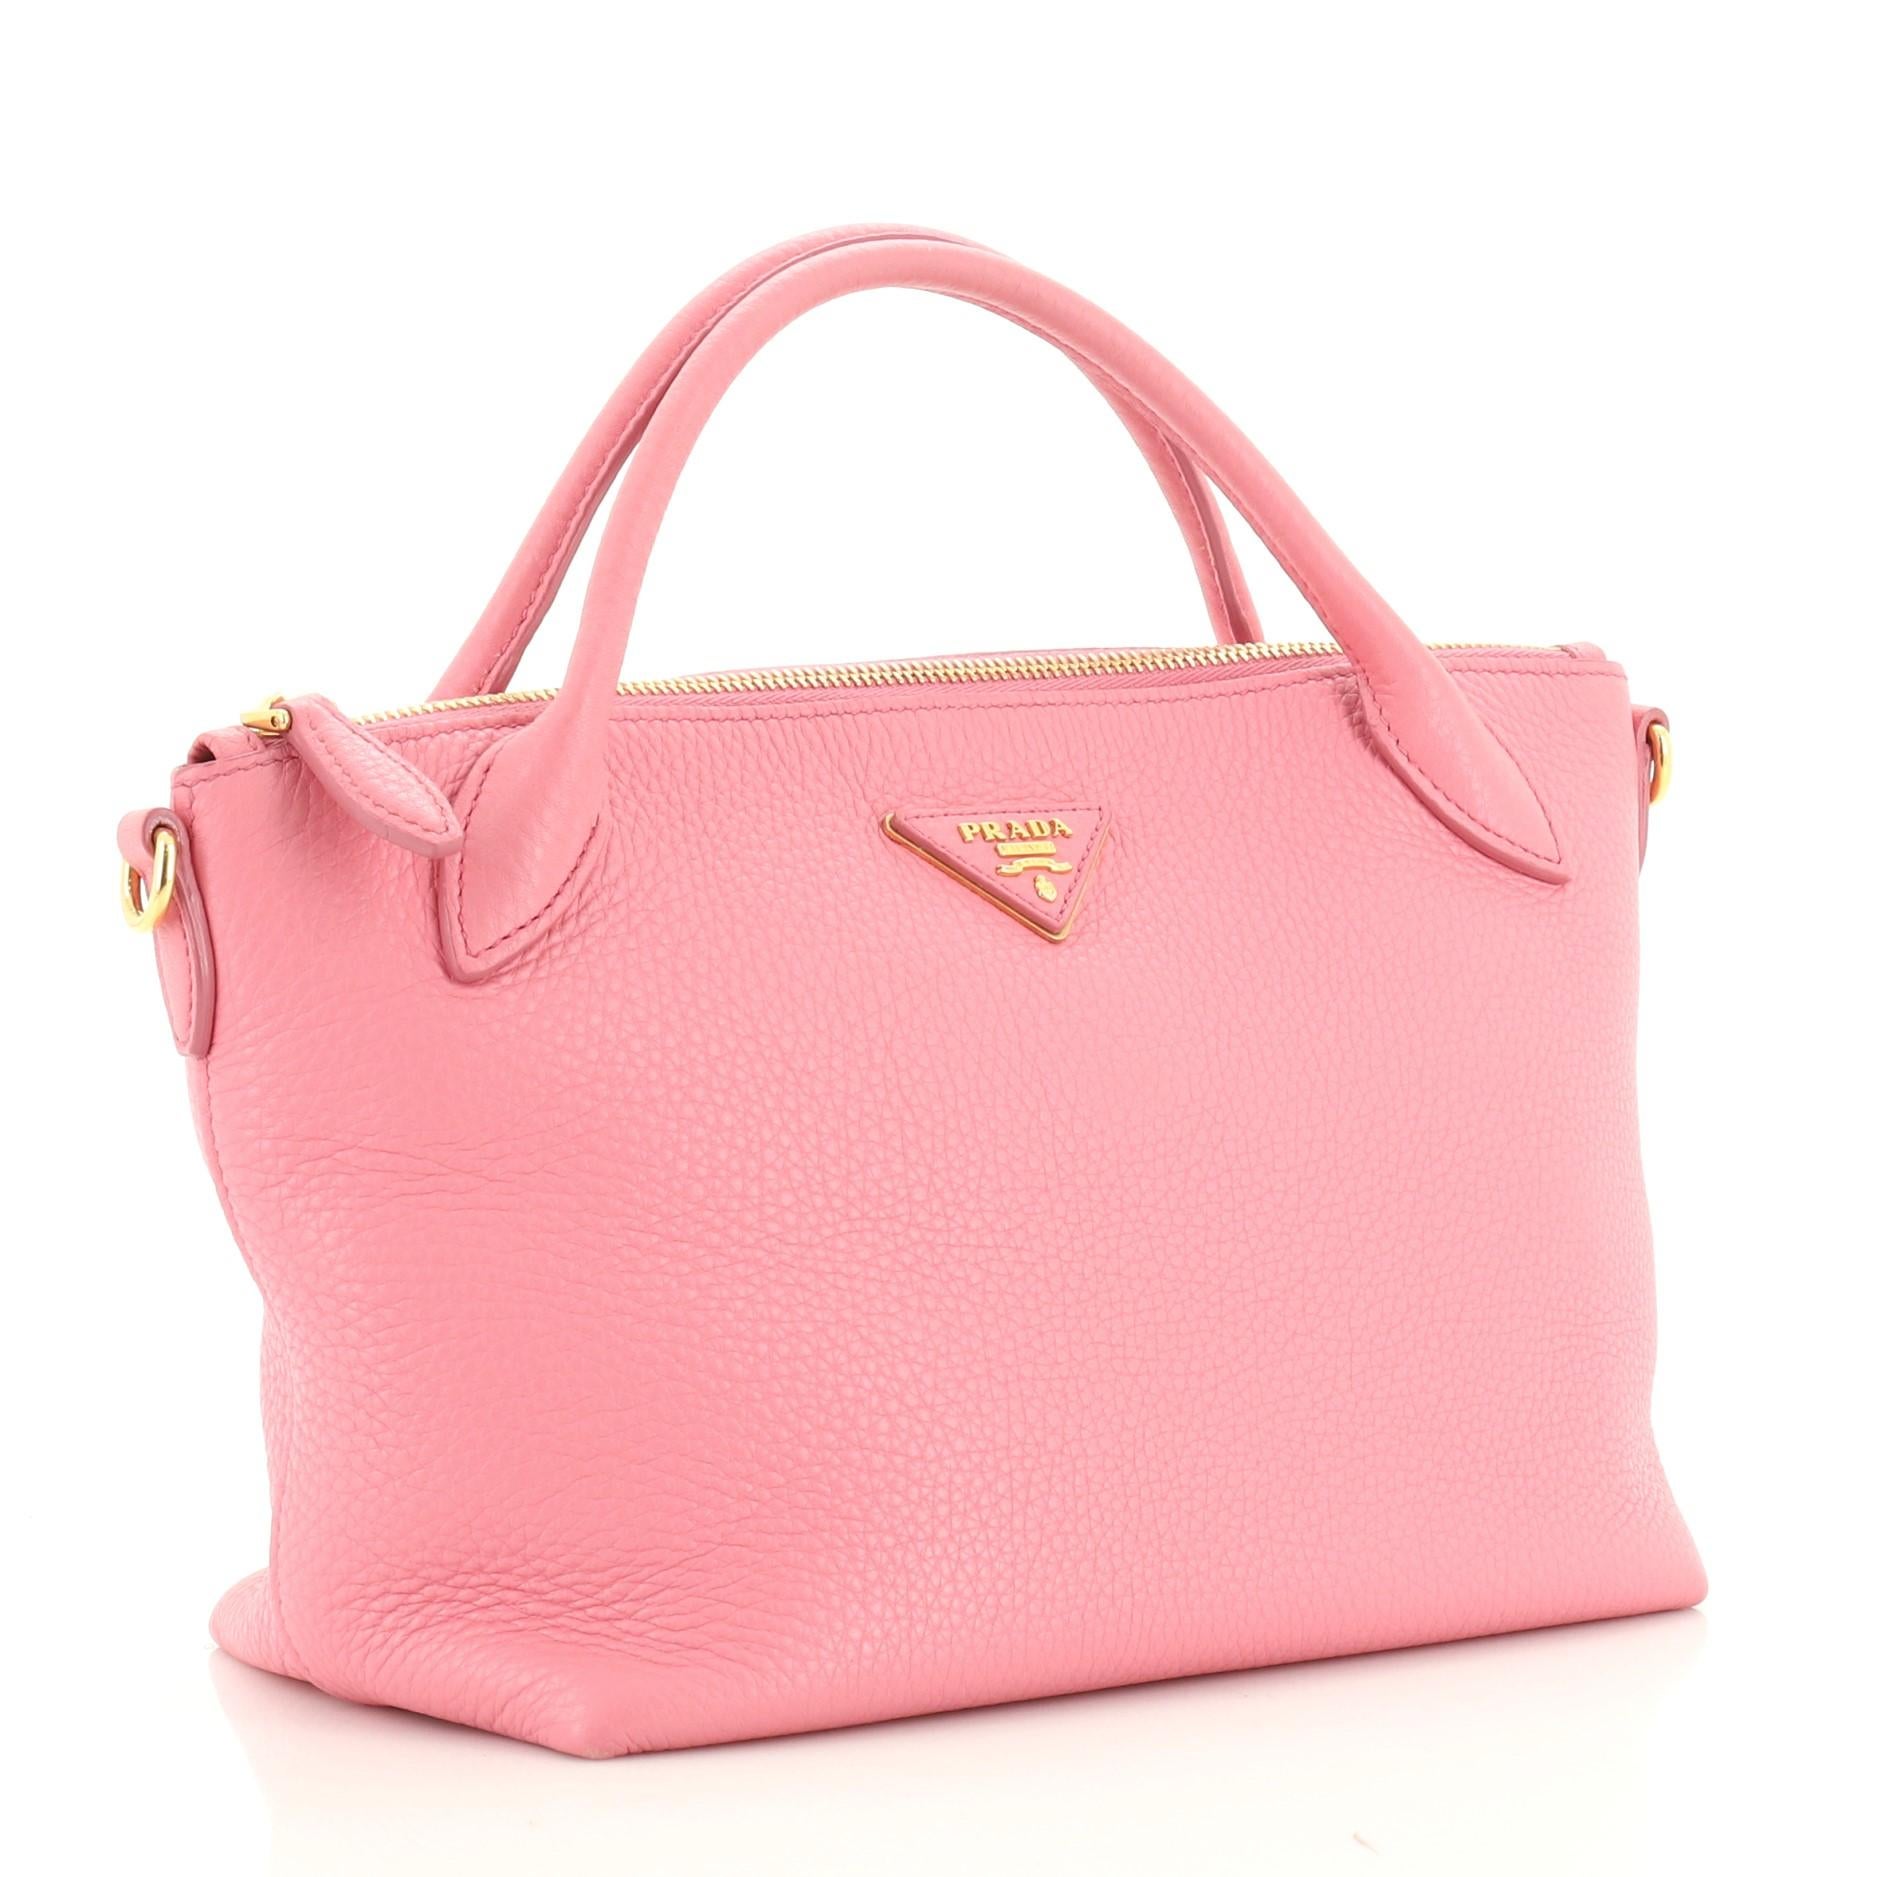 This Prada Convertible Top Handle Satchel Vitello Daino Small, crafted from pink vitello daino leather, features dual rolled leather handles, Prada Milano logo, and gold-tone hardware. Its top zip closure opens to a pink fabric interior with side